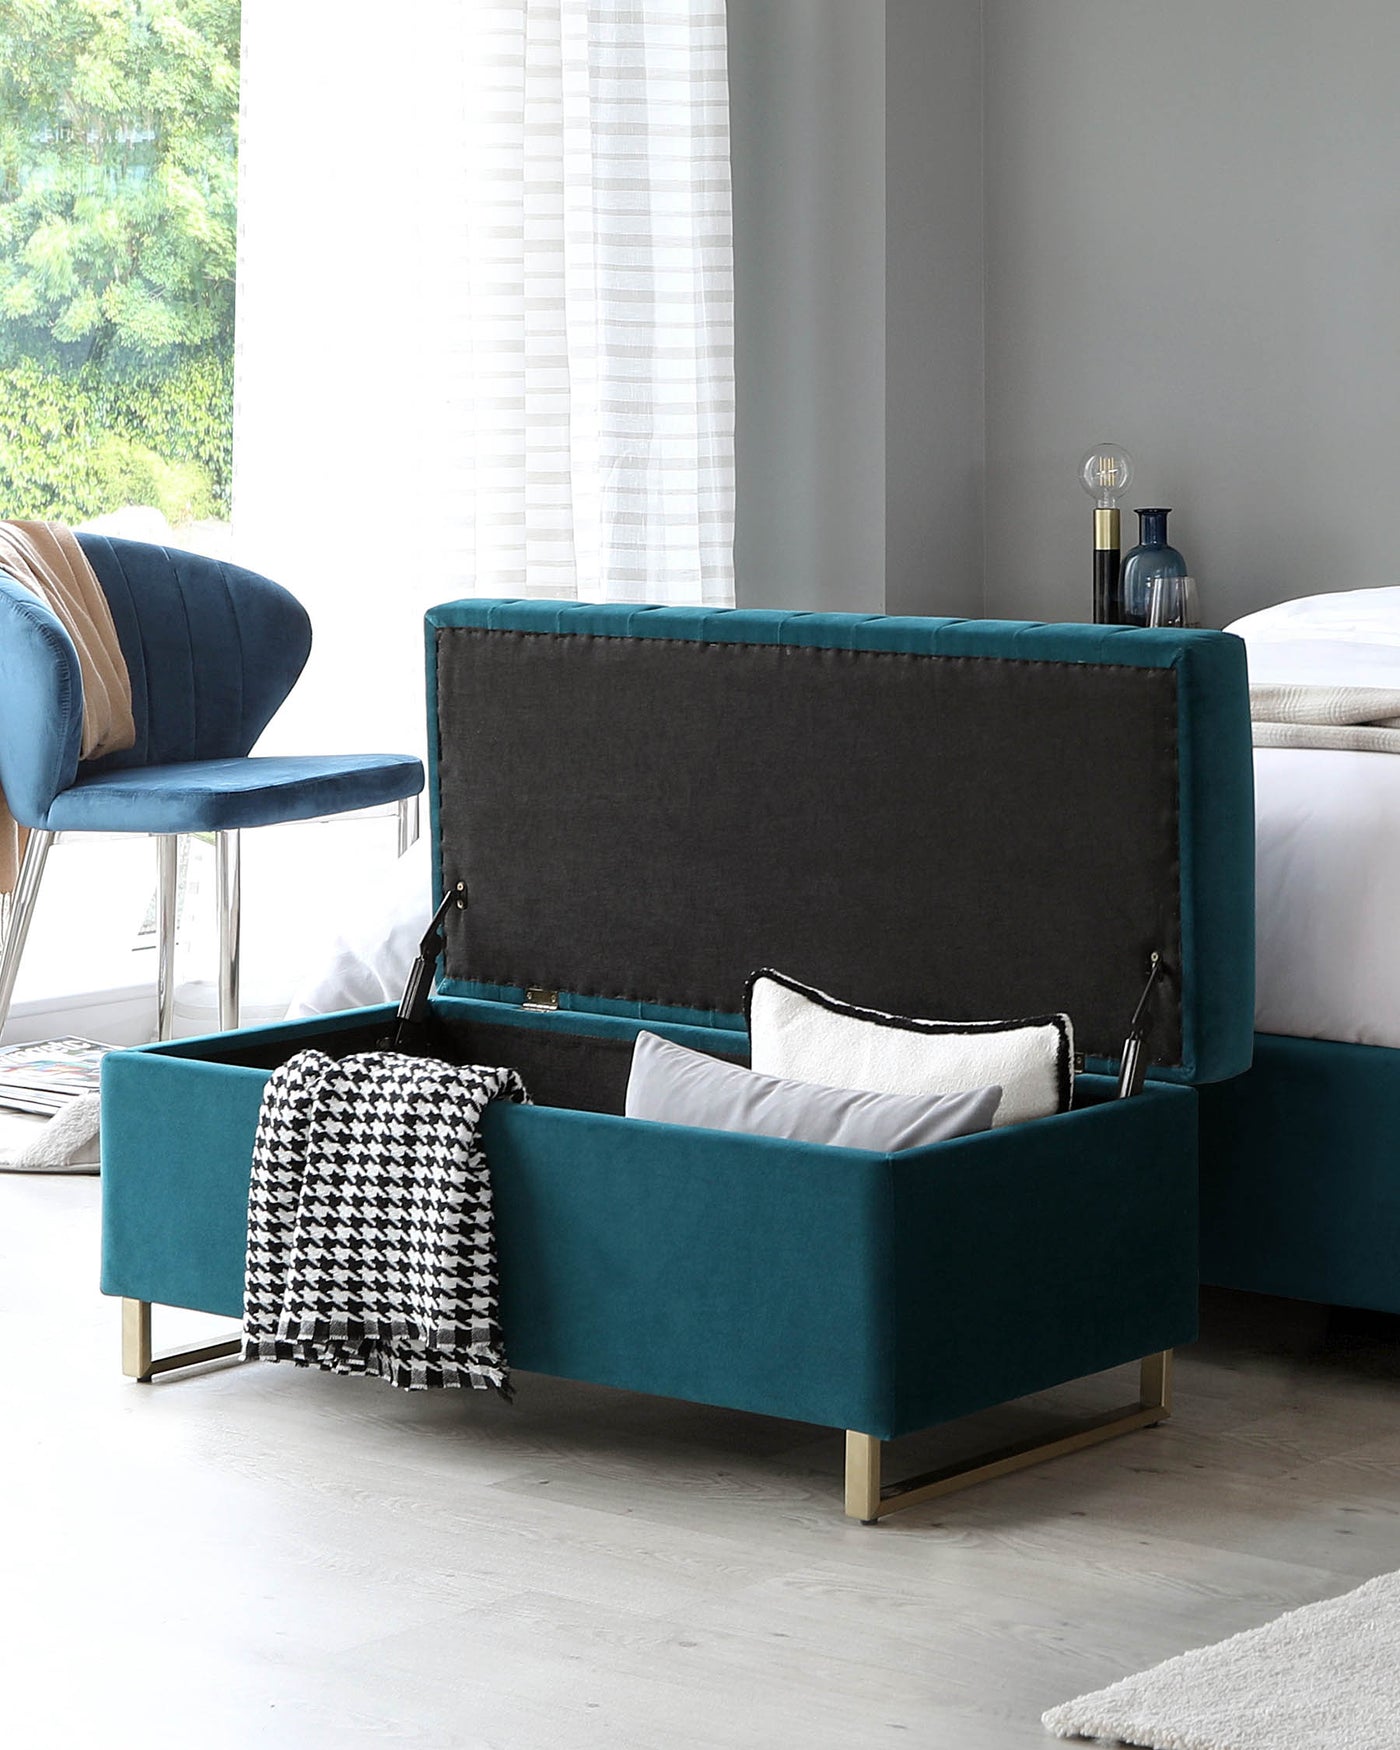 Contemporary style storage bench in teal velvet upholstery with a hinged top, featuring a tufted exterior in a contrasting dark shade, accented by elegant gold-tone metal legs. A black and white patterned throw blanket is casually draped over one side.